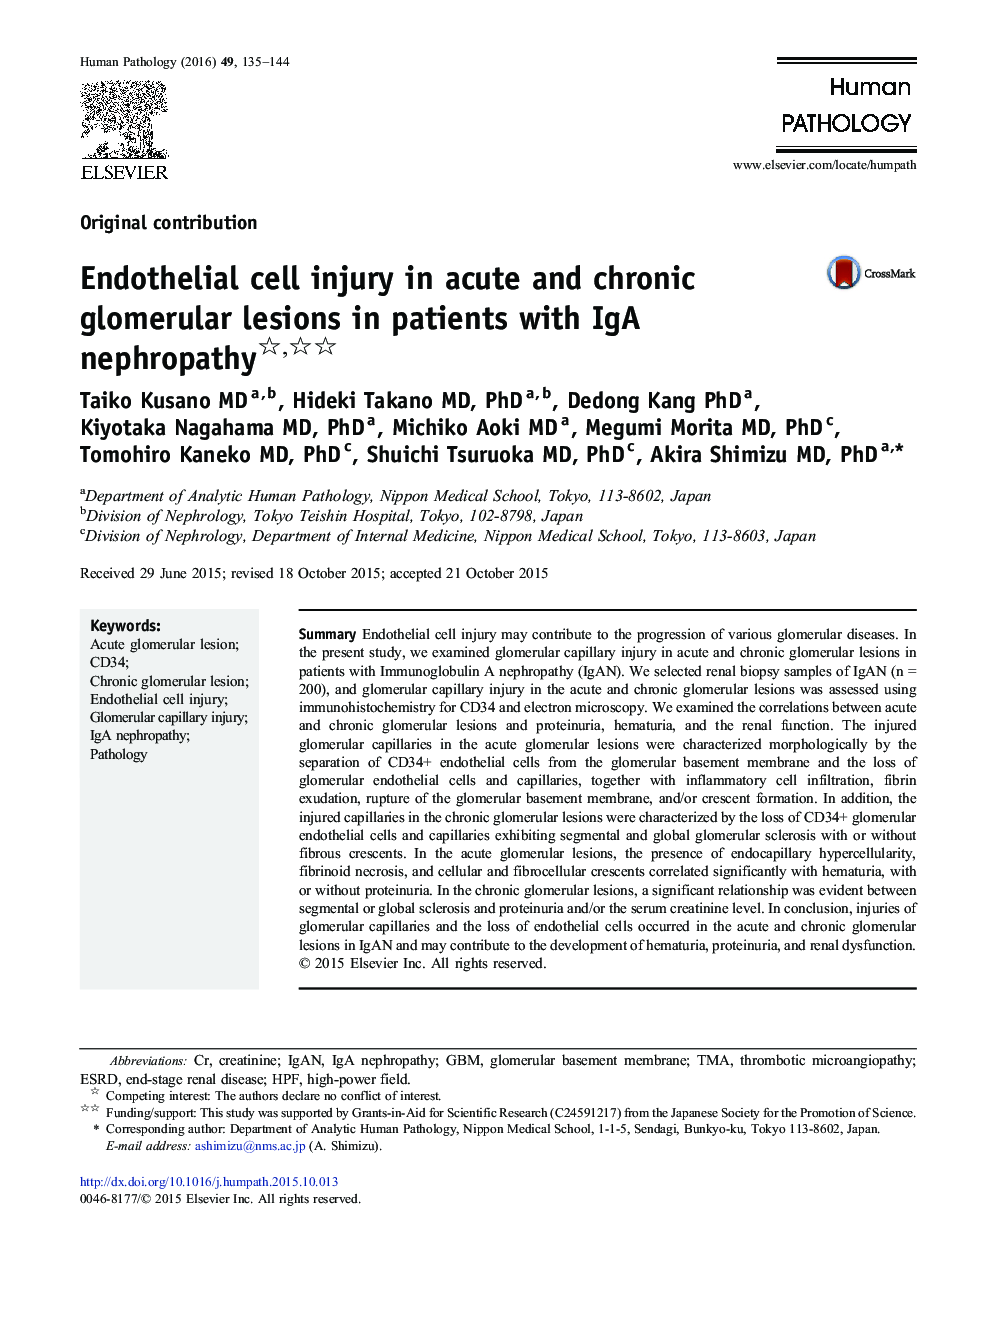 Endothelial cell injury in acute and chronic glomerular lesions in patients with IgA nephropathy 